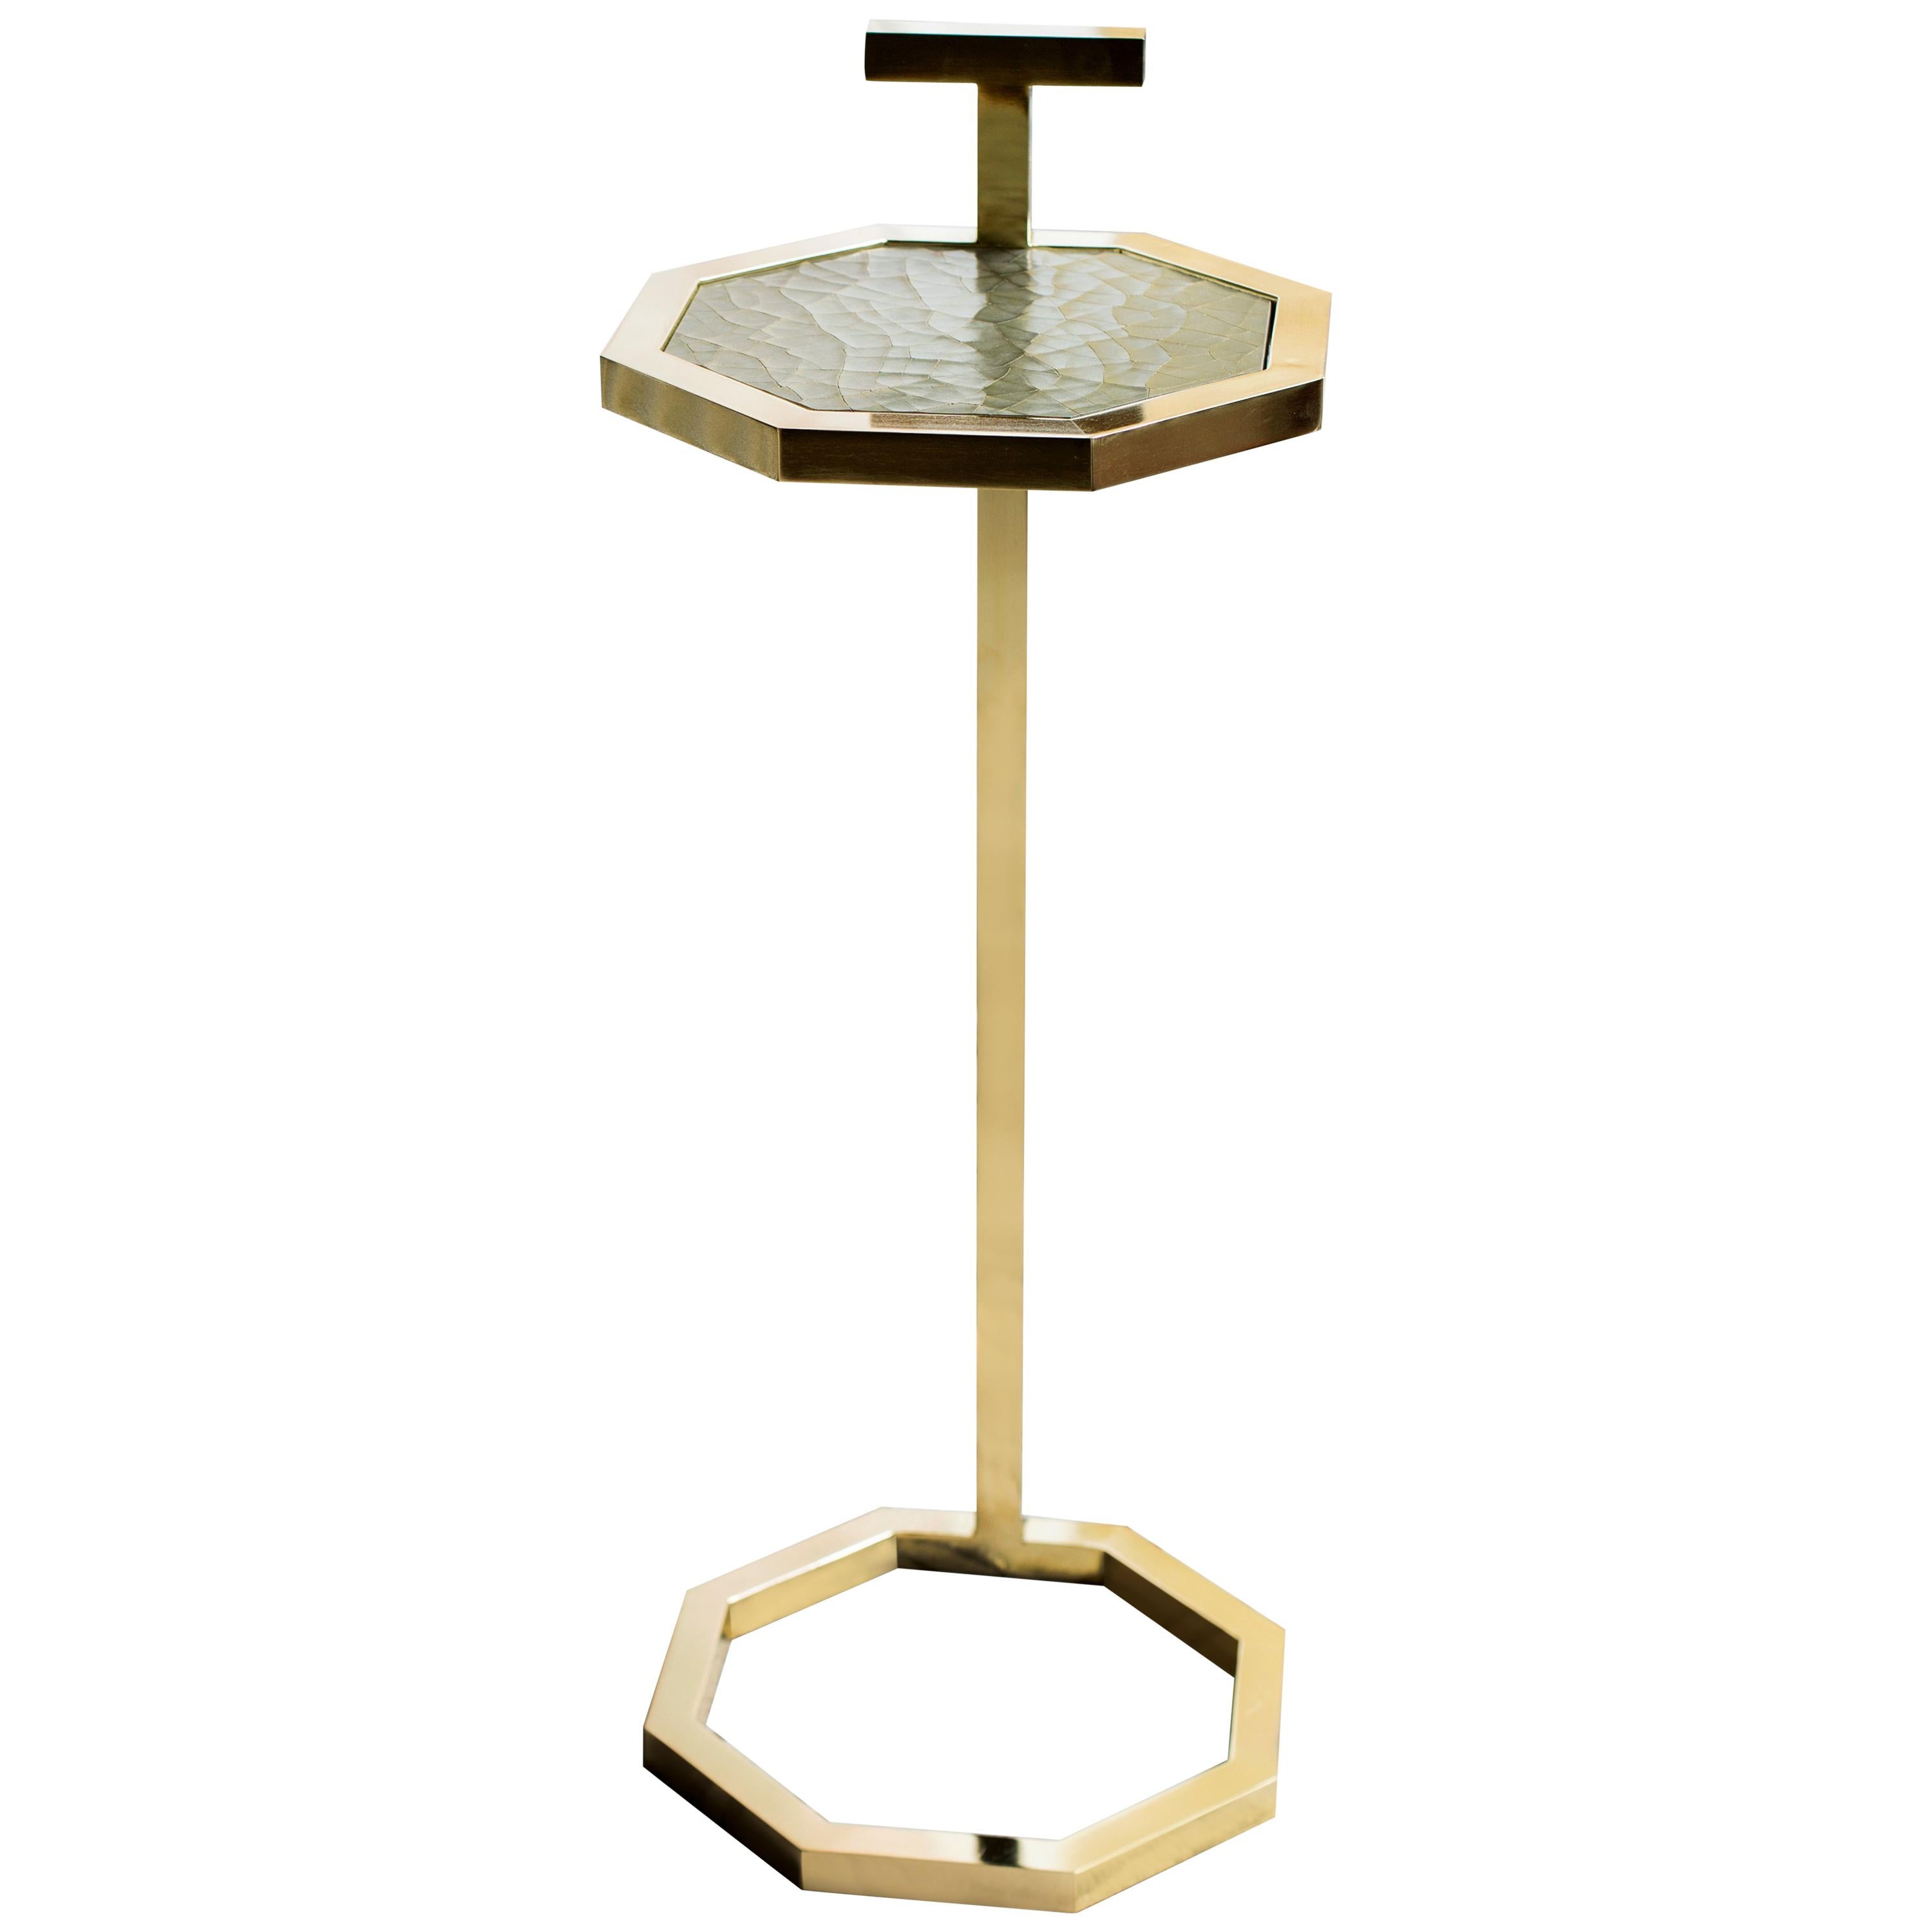 Gibson Martini Table in Brass Tinted Finish and Cracked Gesso Surface